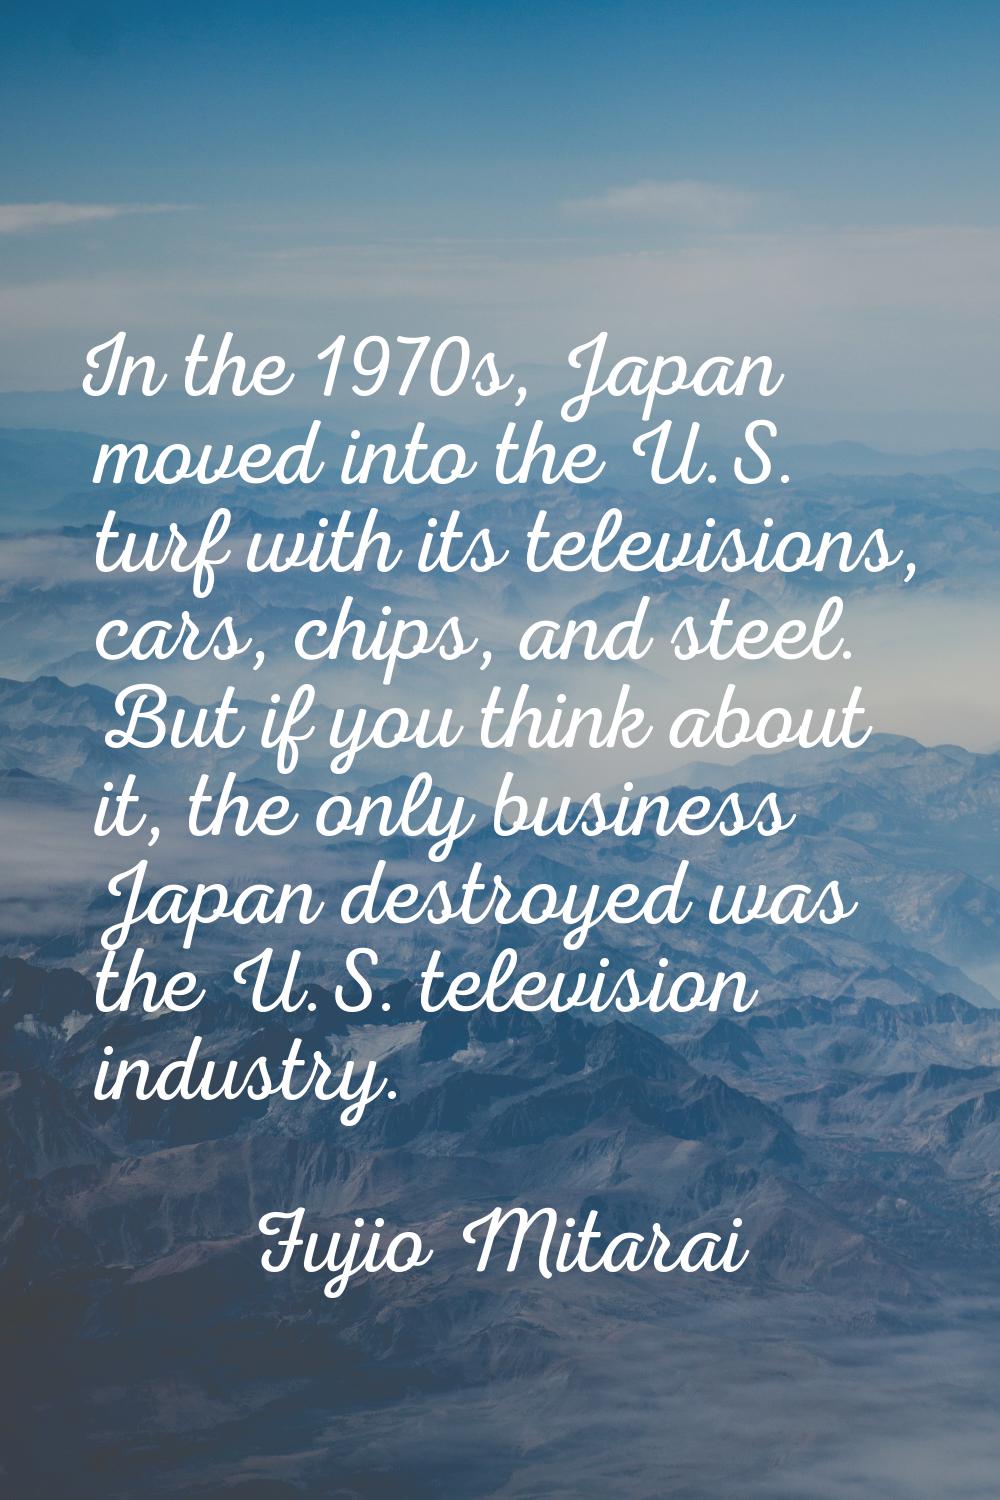 In the 1970s, Japan moved into the U.S. turf with its televisions, cars, chips, and steel. But if y